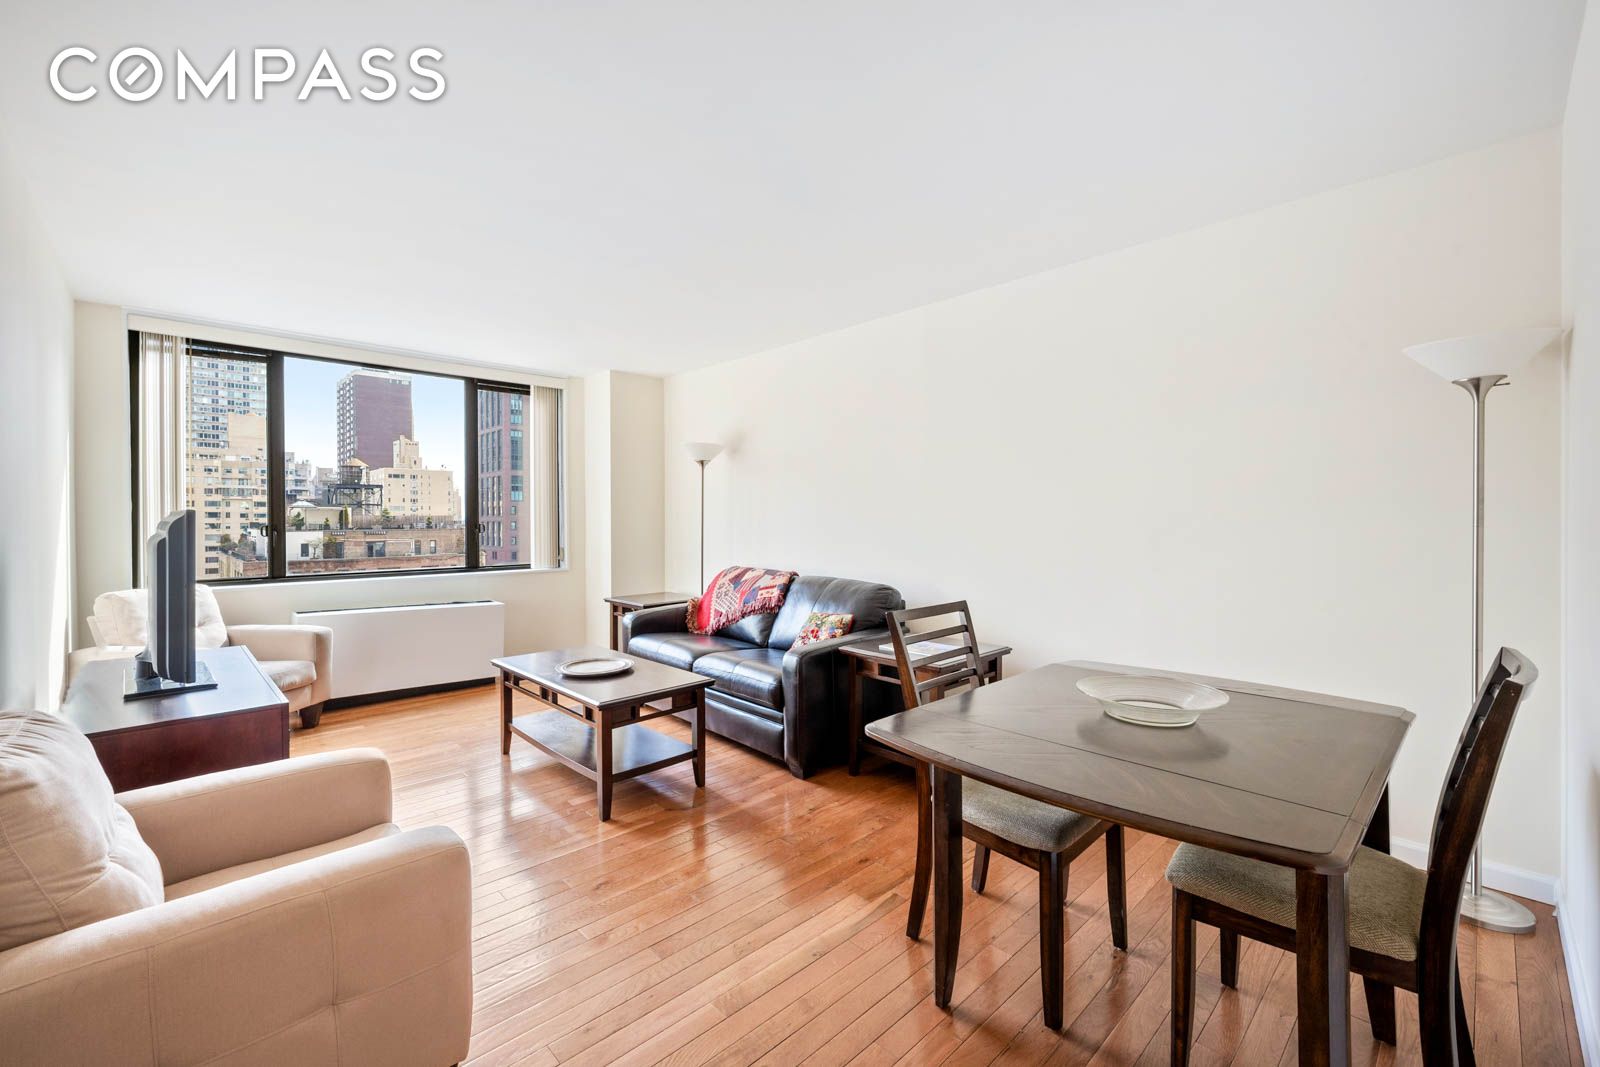 300 East 54th Street Sutton Place New York NY 10022